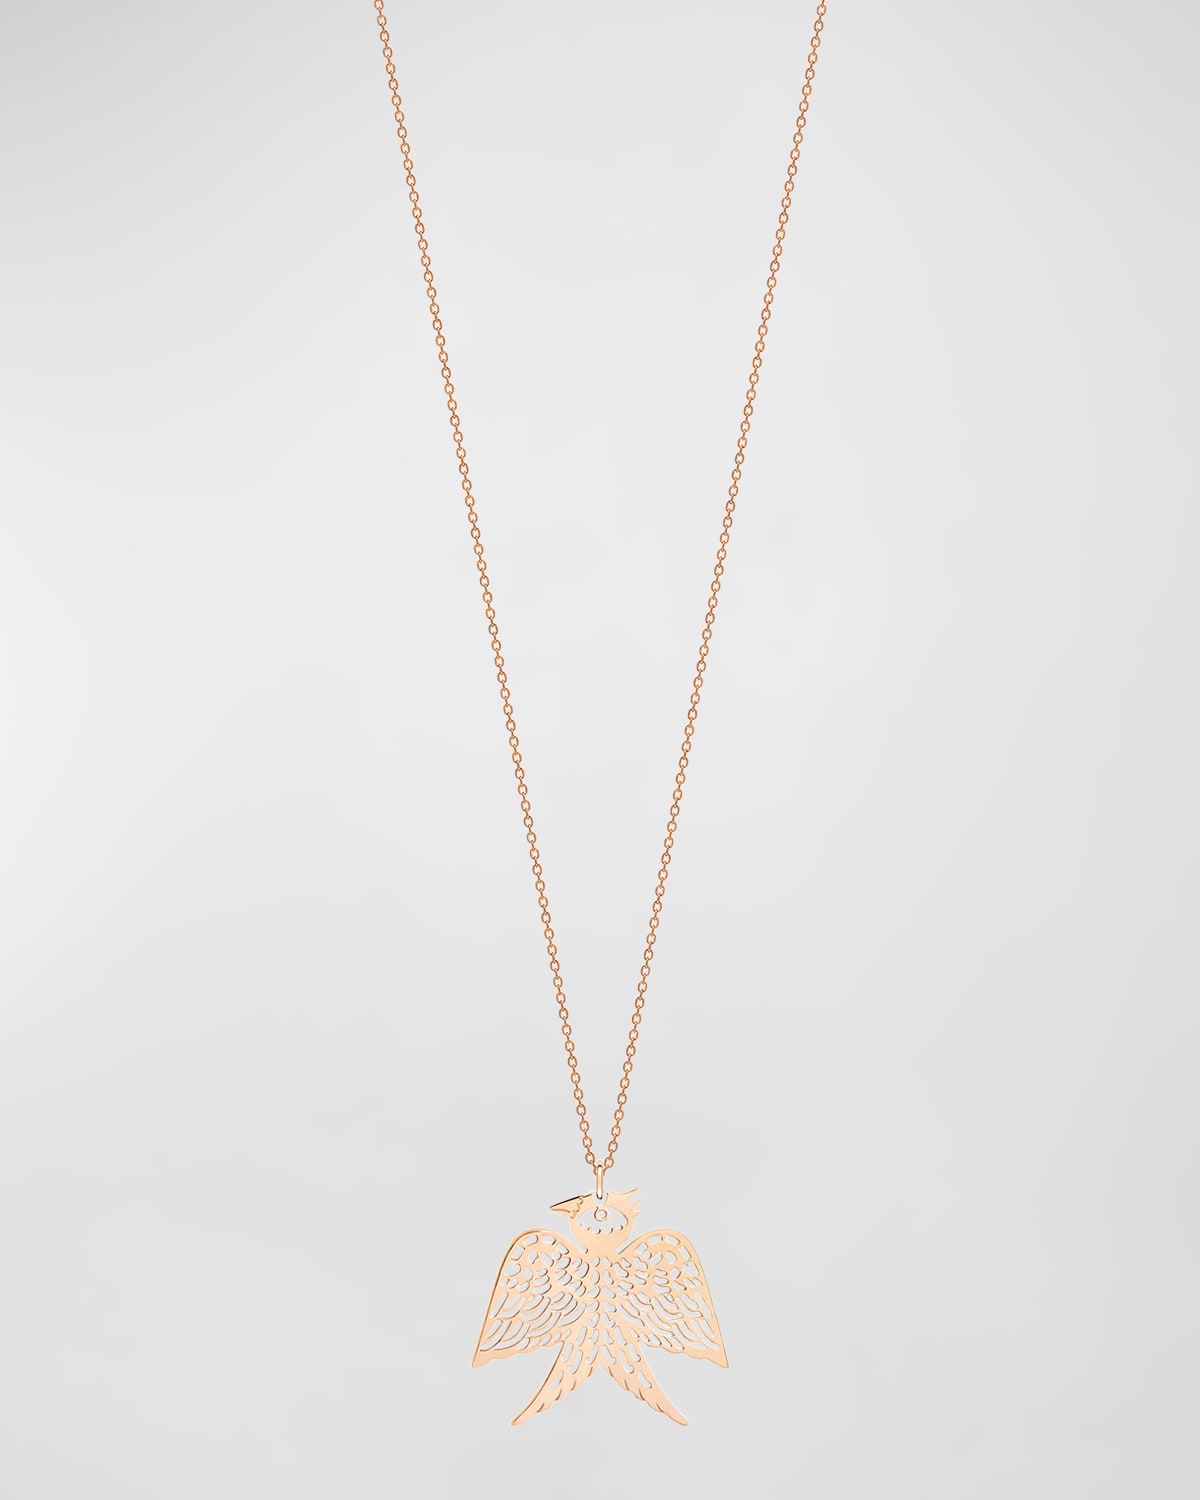 Georgia on Chain 18K Rose Gold Necklace